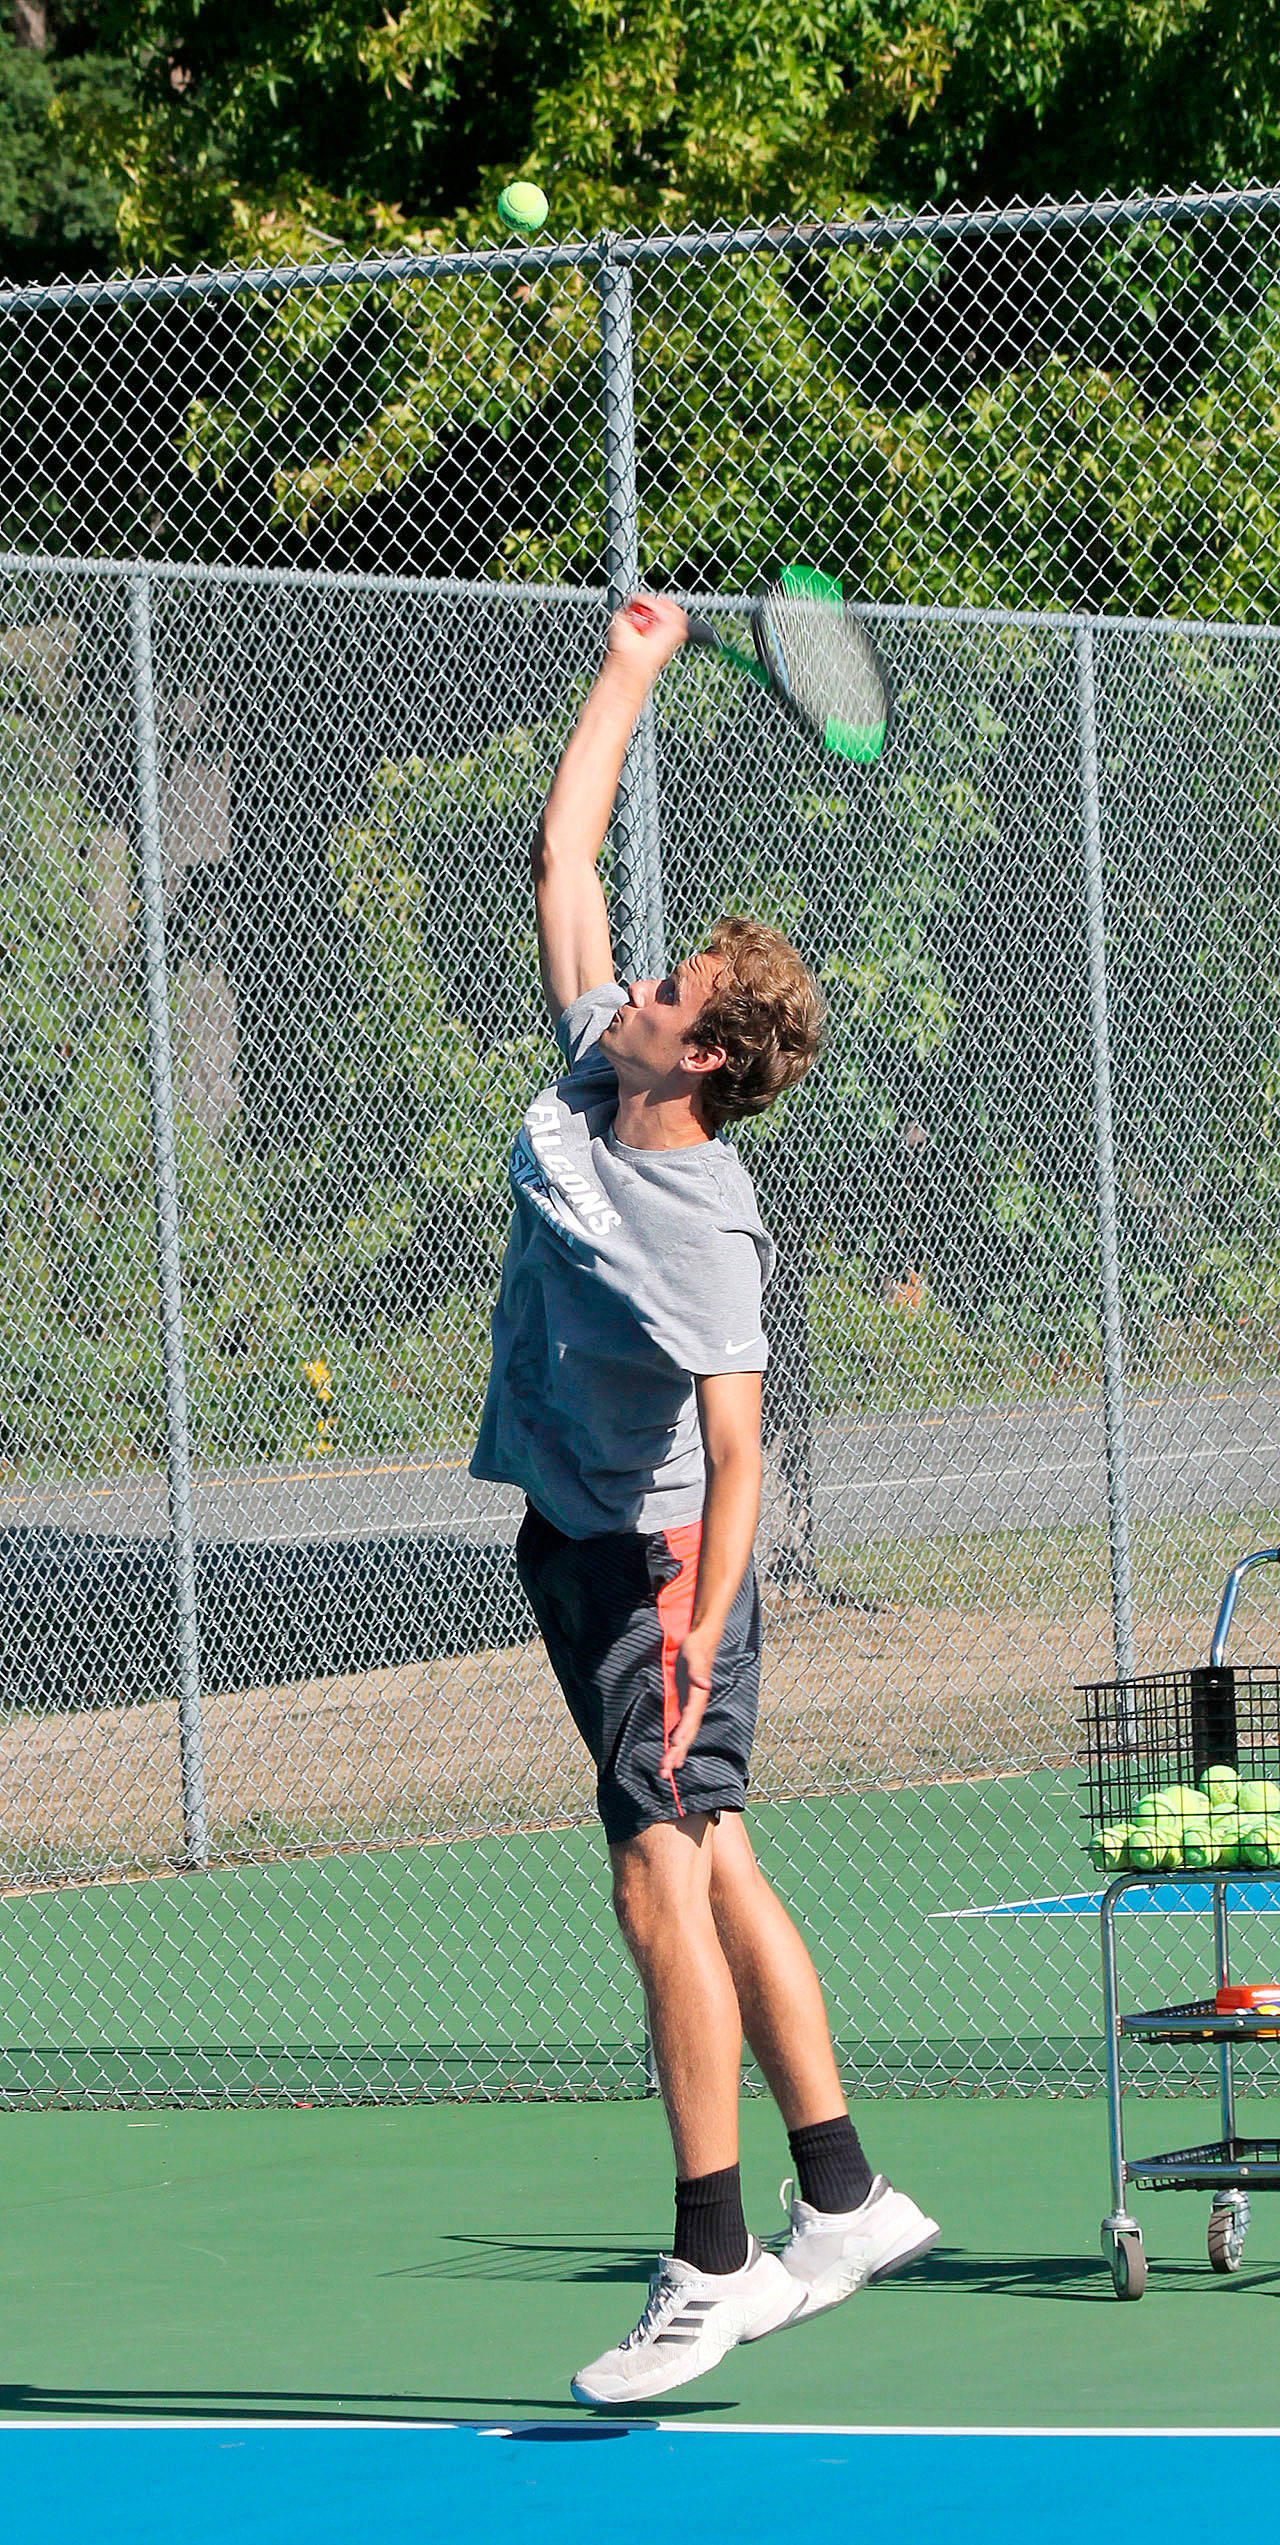 Levi Buck returns to play first singles for the South Whidbey tennis team this fall. (Photo by Jim Waller/South Whidbey Record)